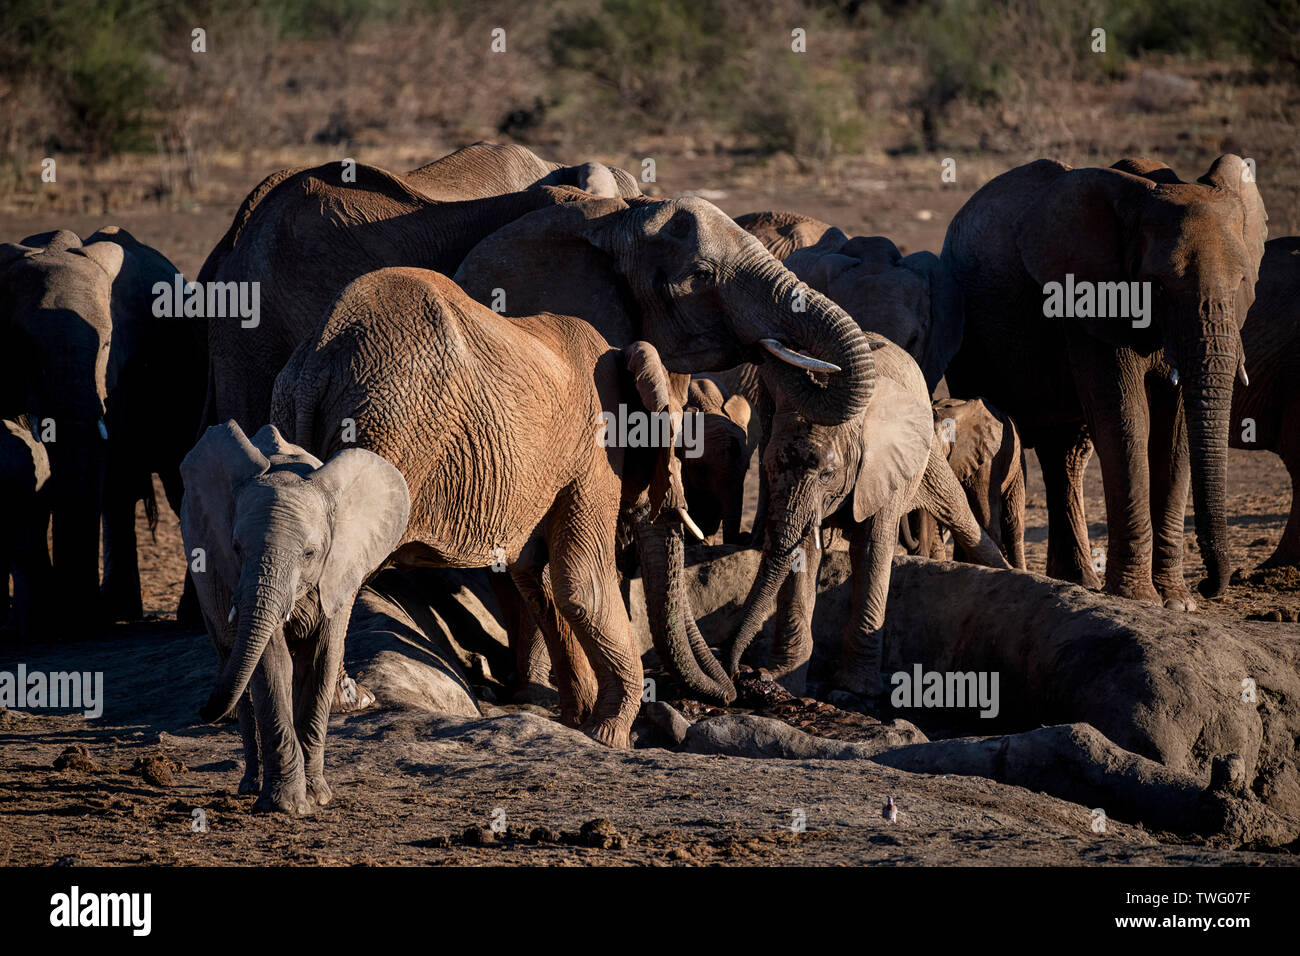 A herd of elephants gathered around a small pool of mud Stock Photo